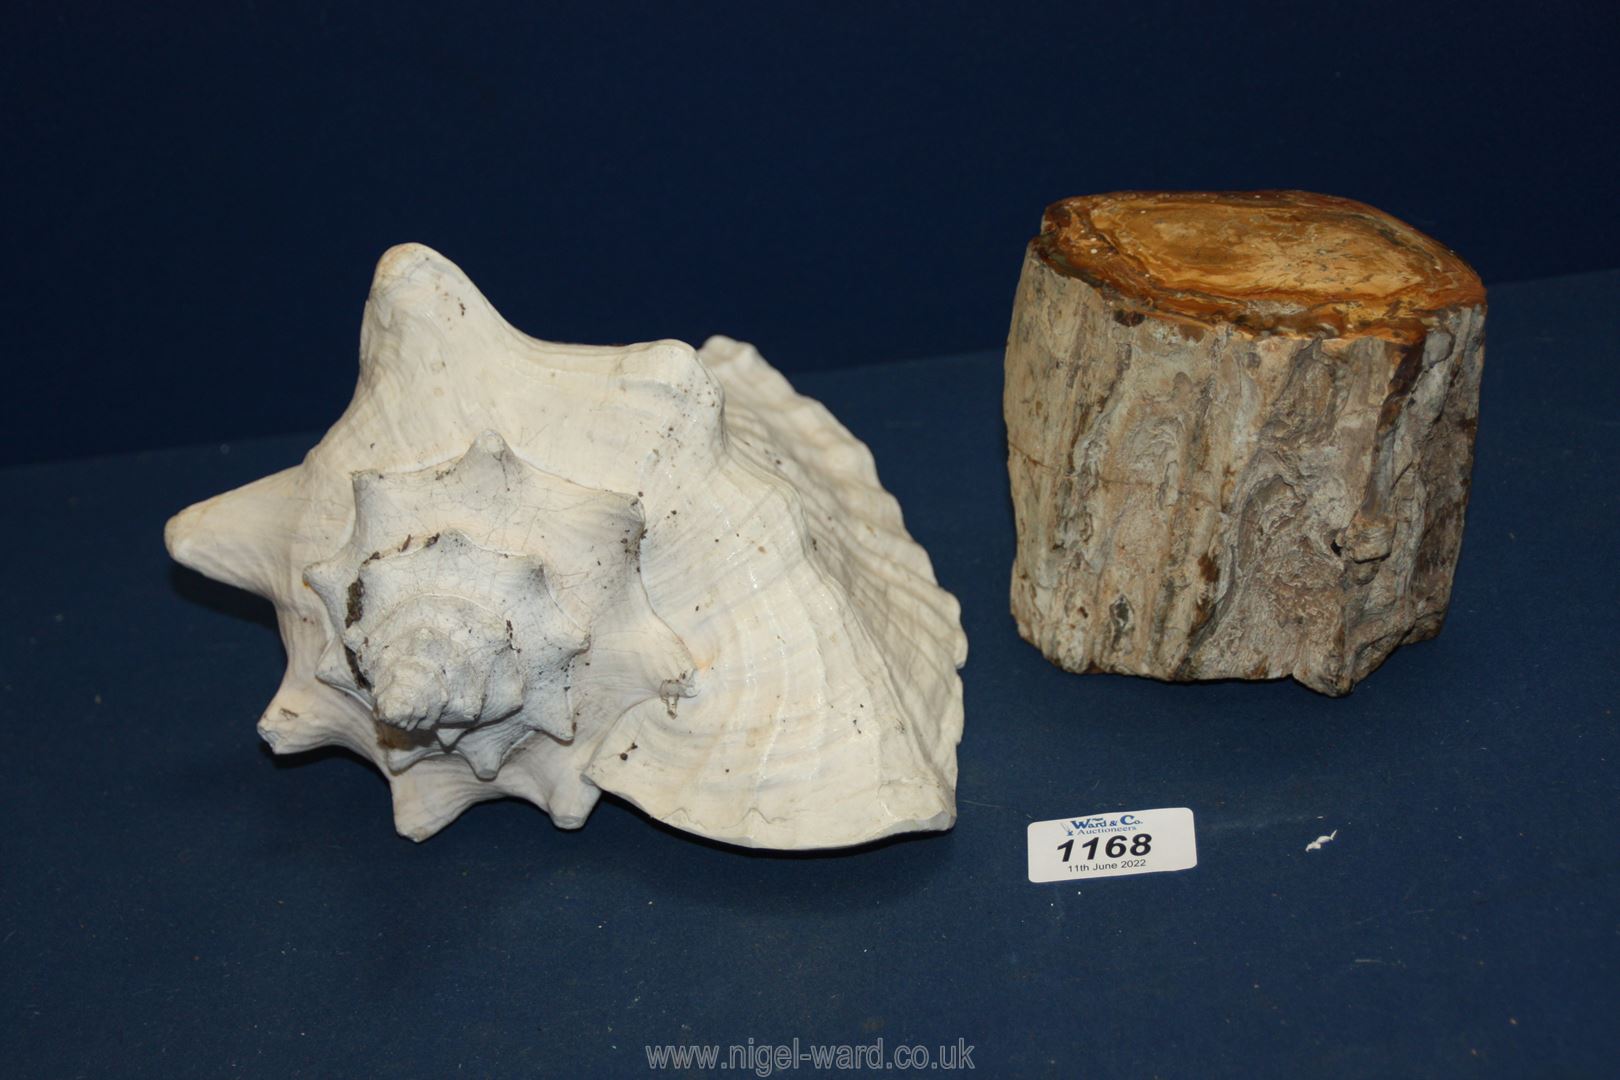 A Conch shell and a piece of fossilized wood from Madagascar.